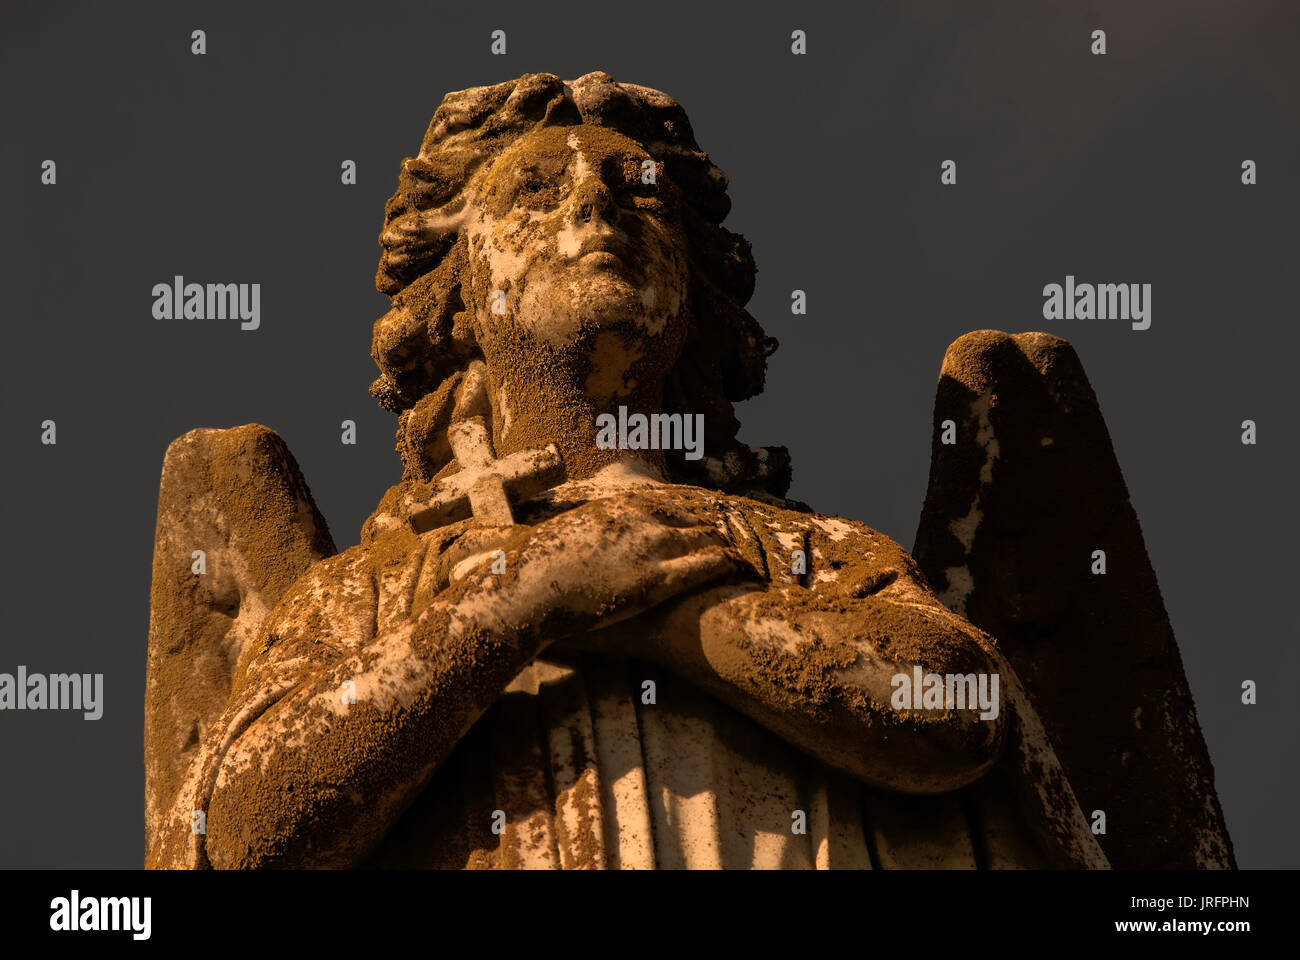 A statue of a male angel with wings holding a small cross. Stock Photo